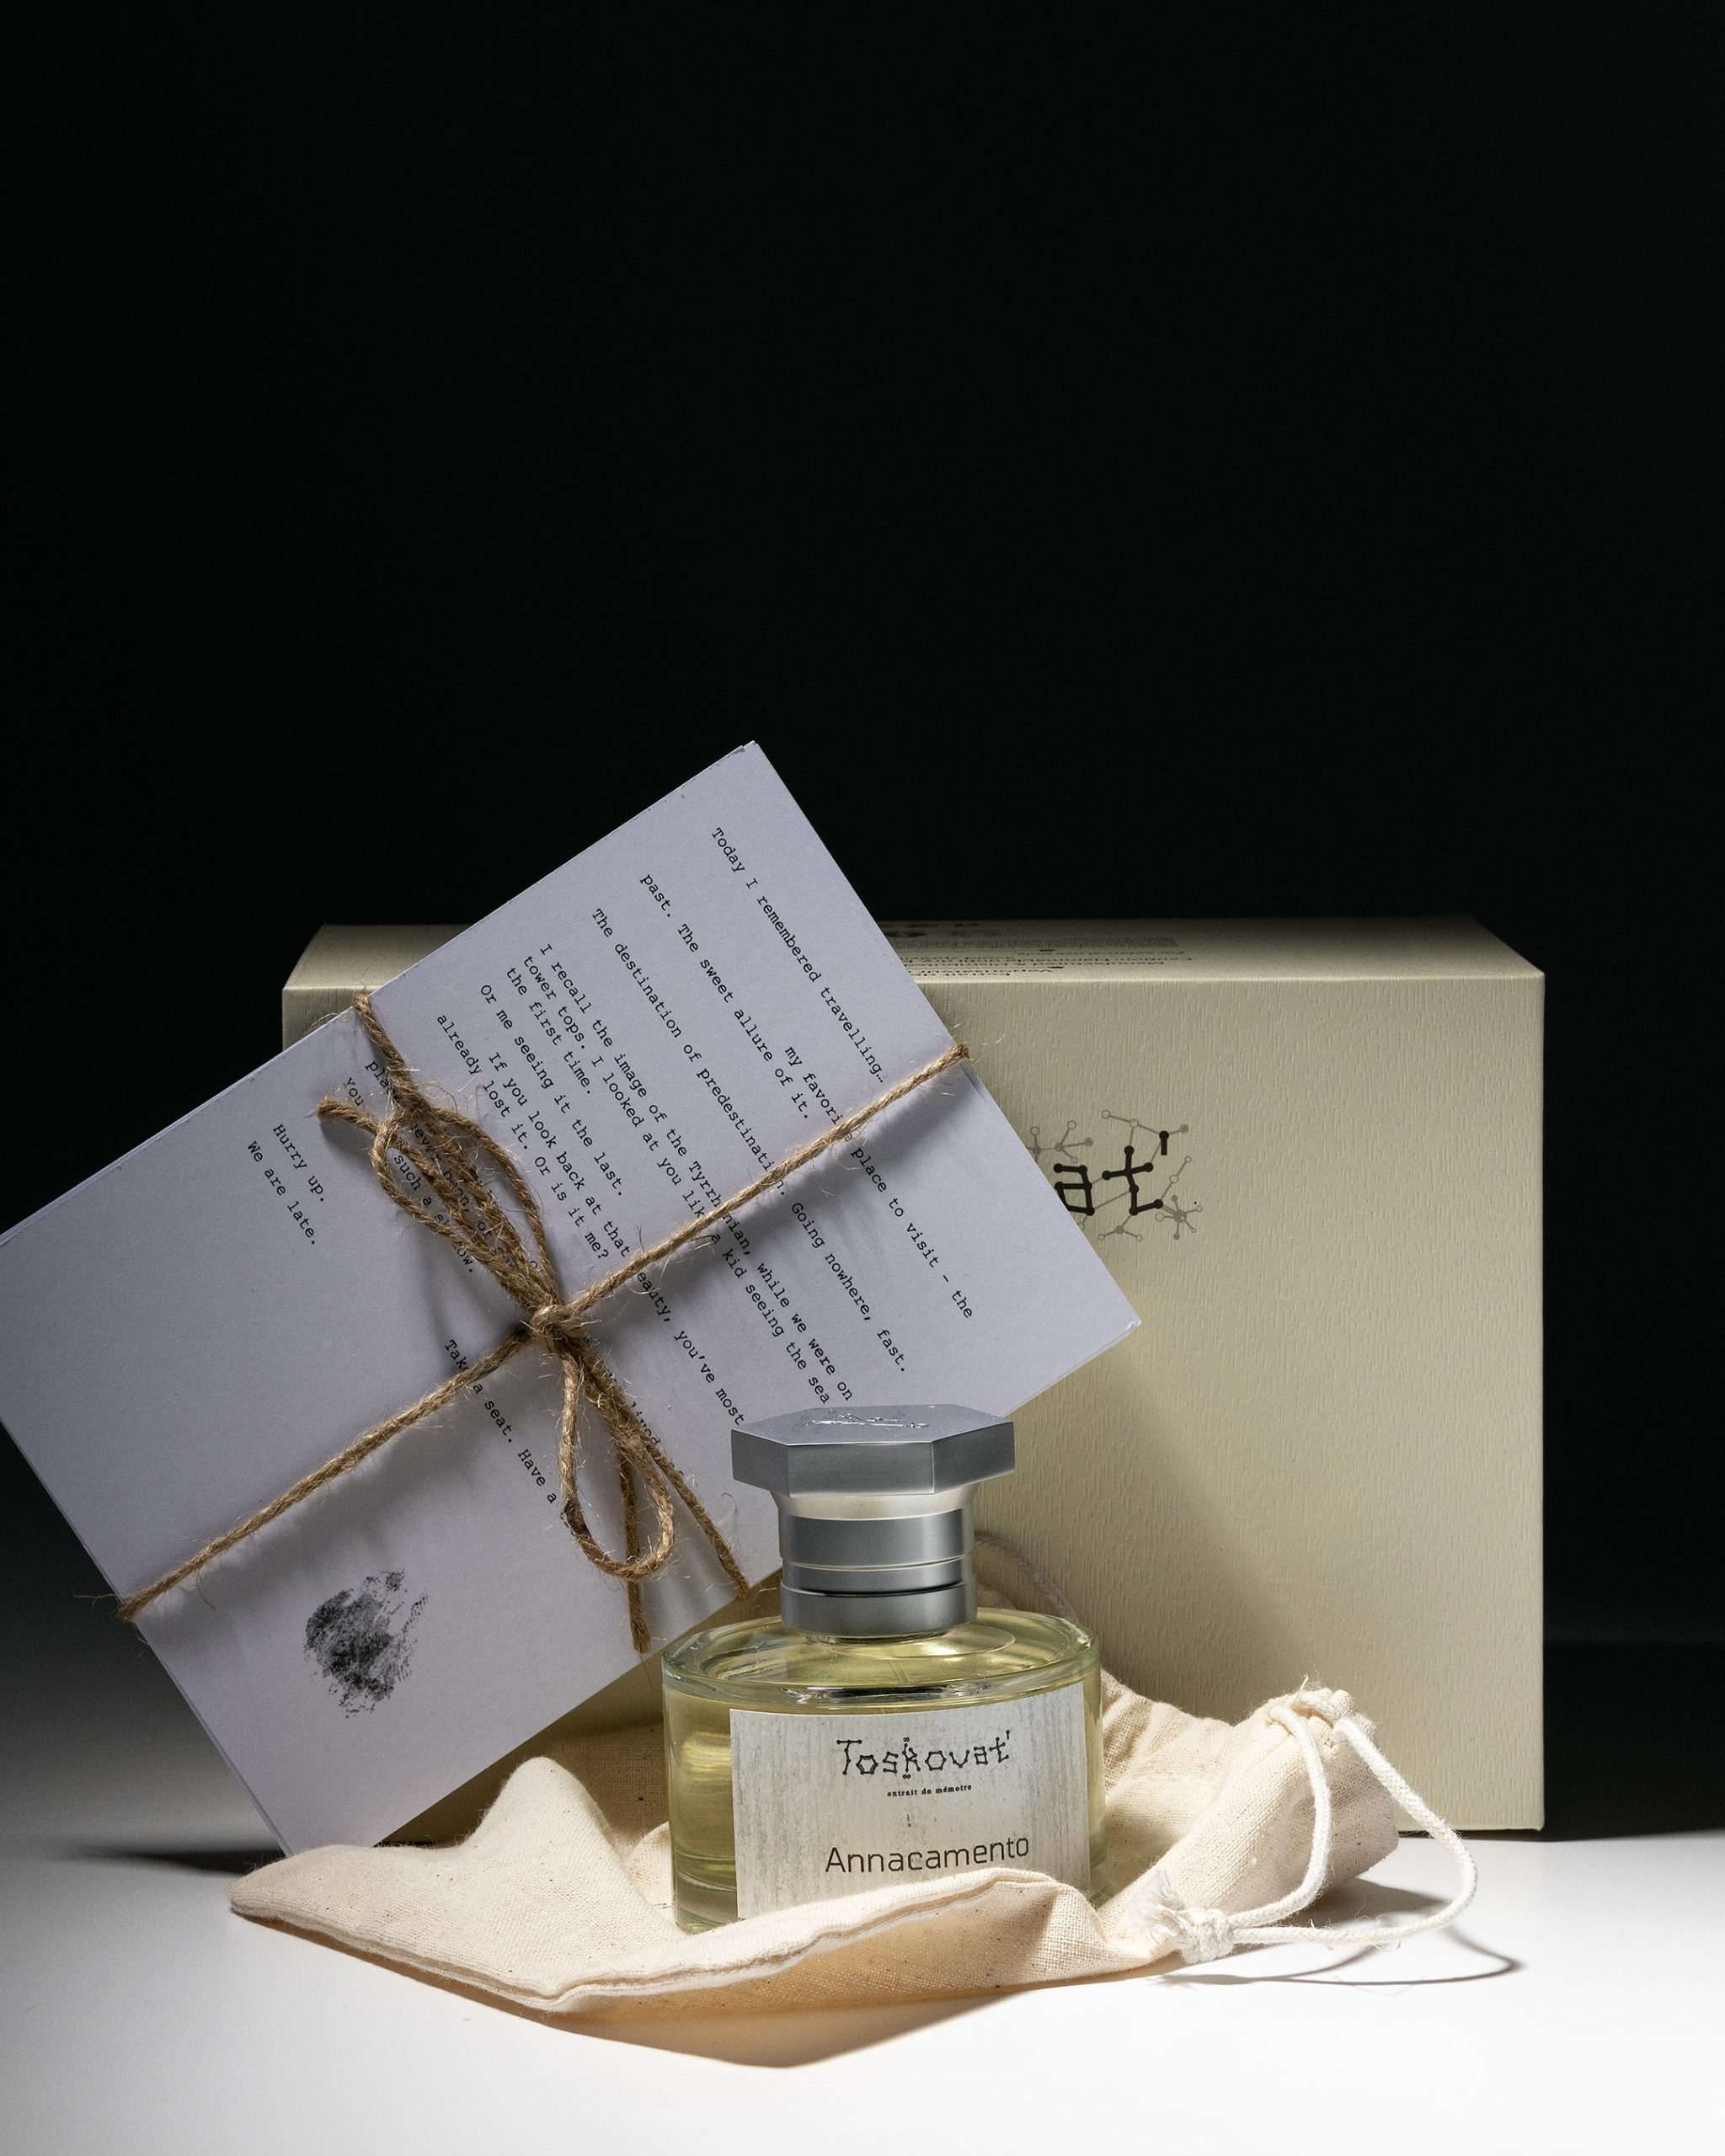 Rhapsody - Perfumes - Exceptional Creations